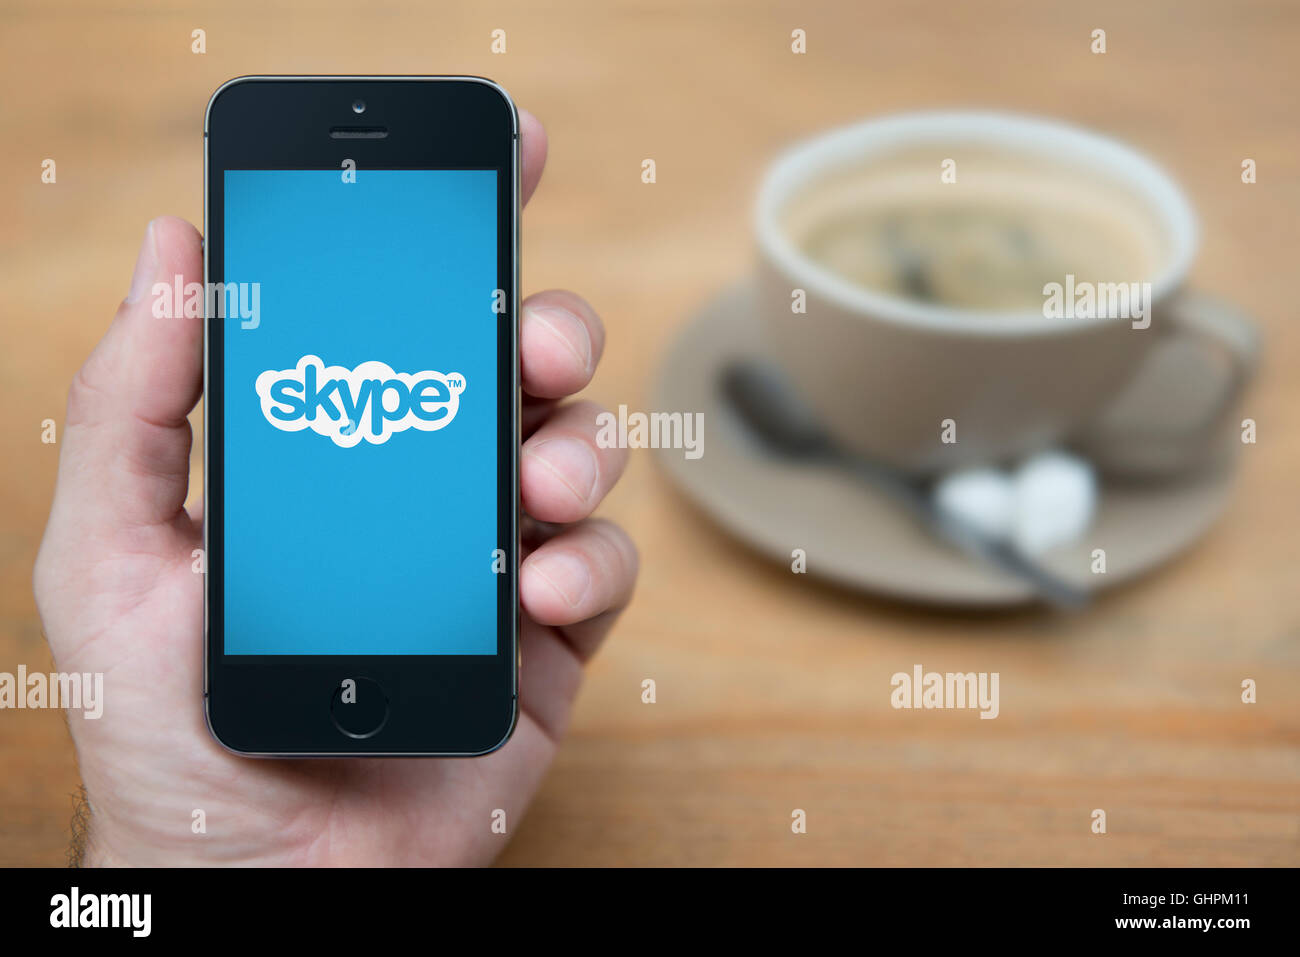 A man looks at his iPhone which displays the Skype logo, while sat with a cup of coffee (Editorial use only). Stock Photo